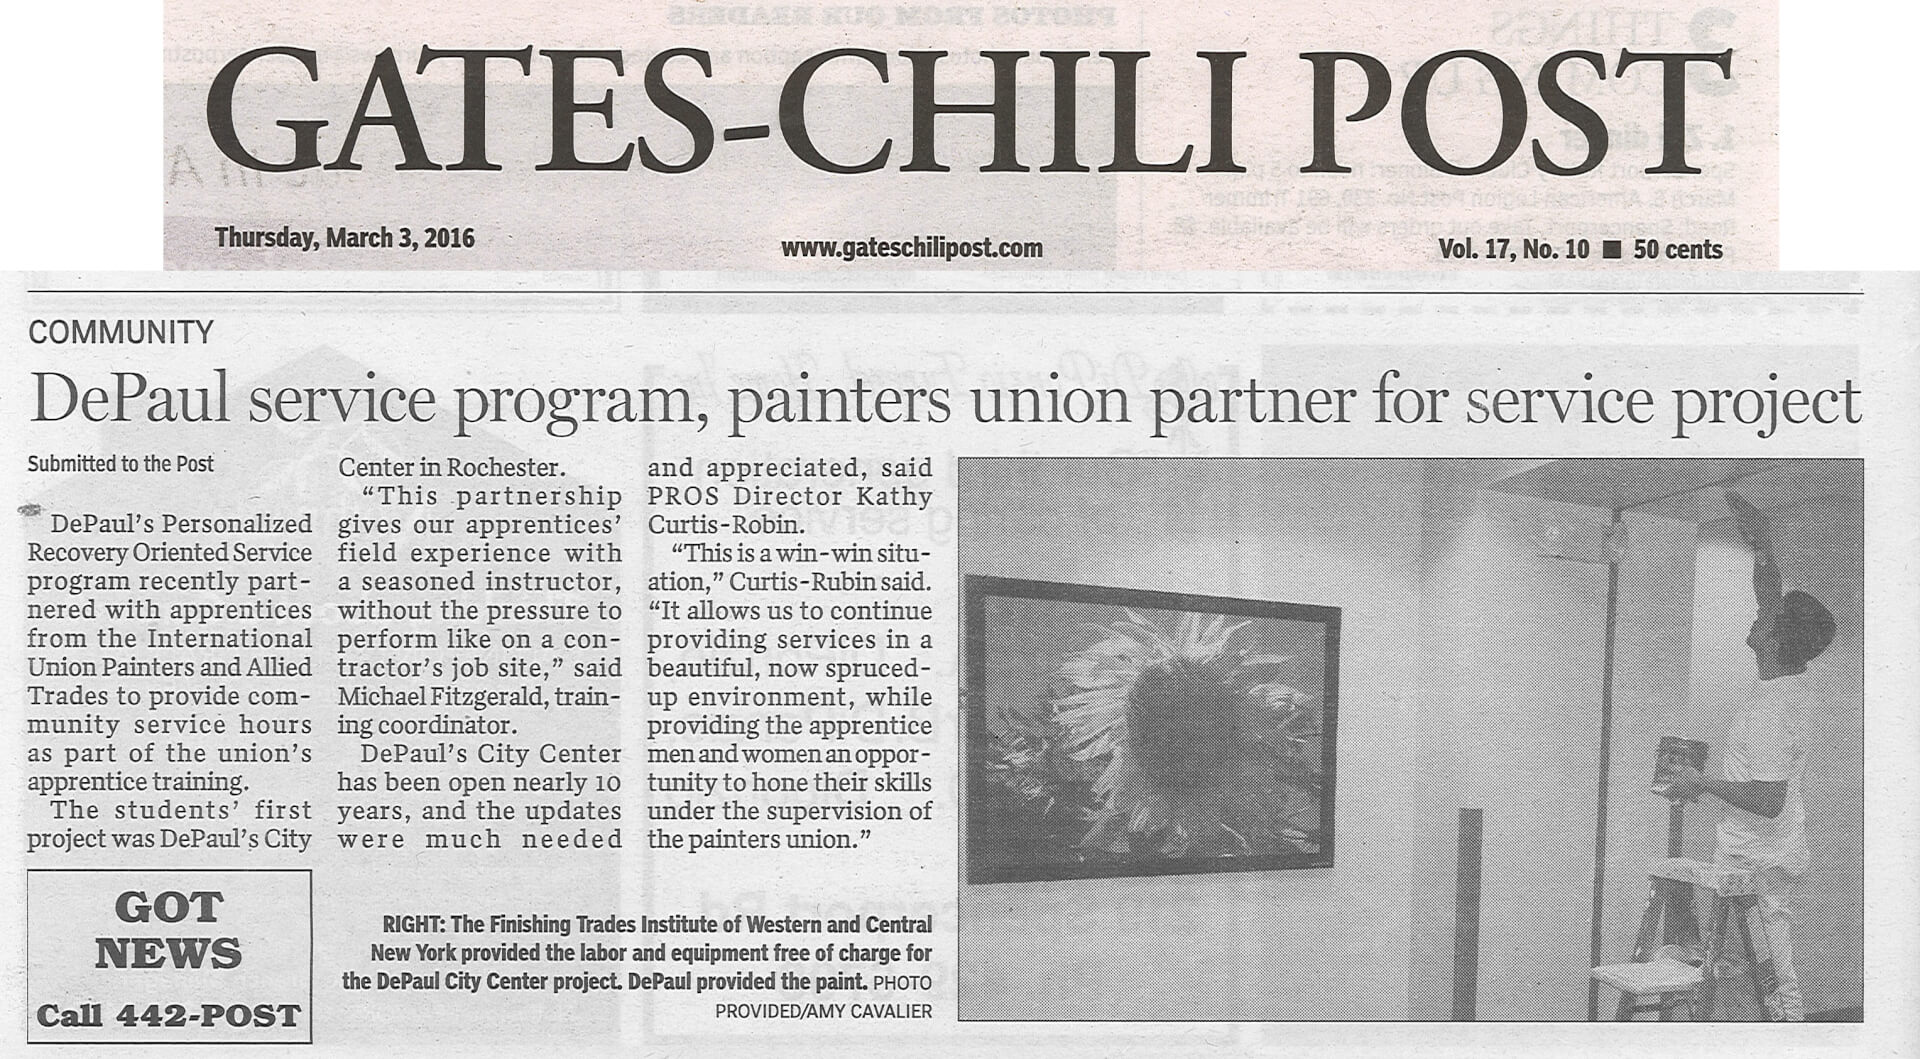 DePaul PROS Partnership with Painters Union article in the Gates Chili Post March 3, 2016